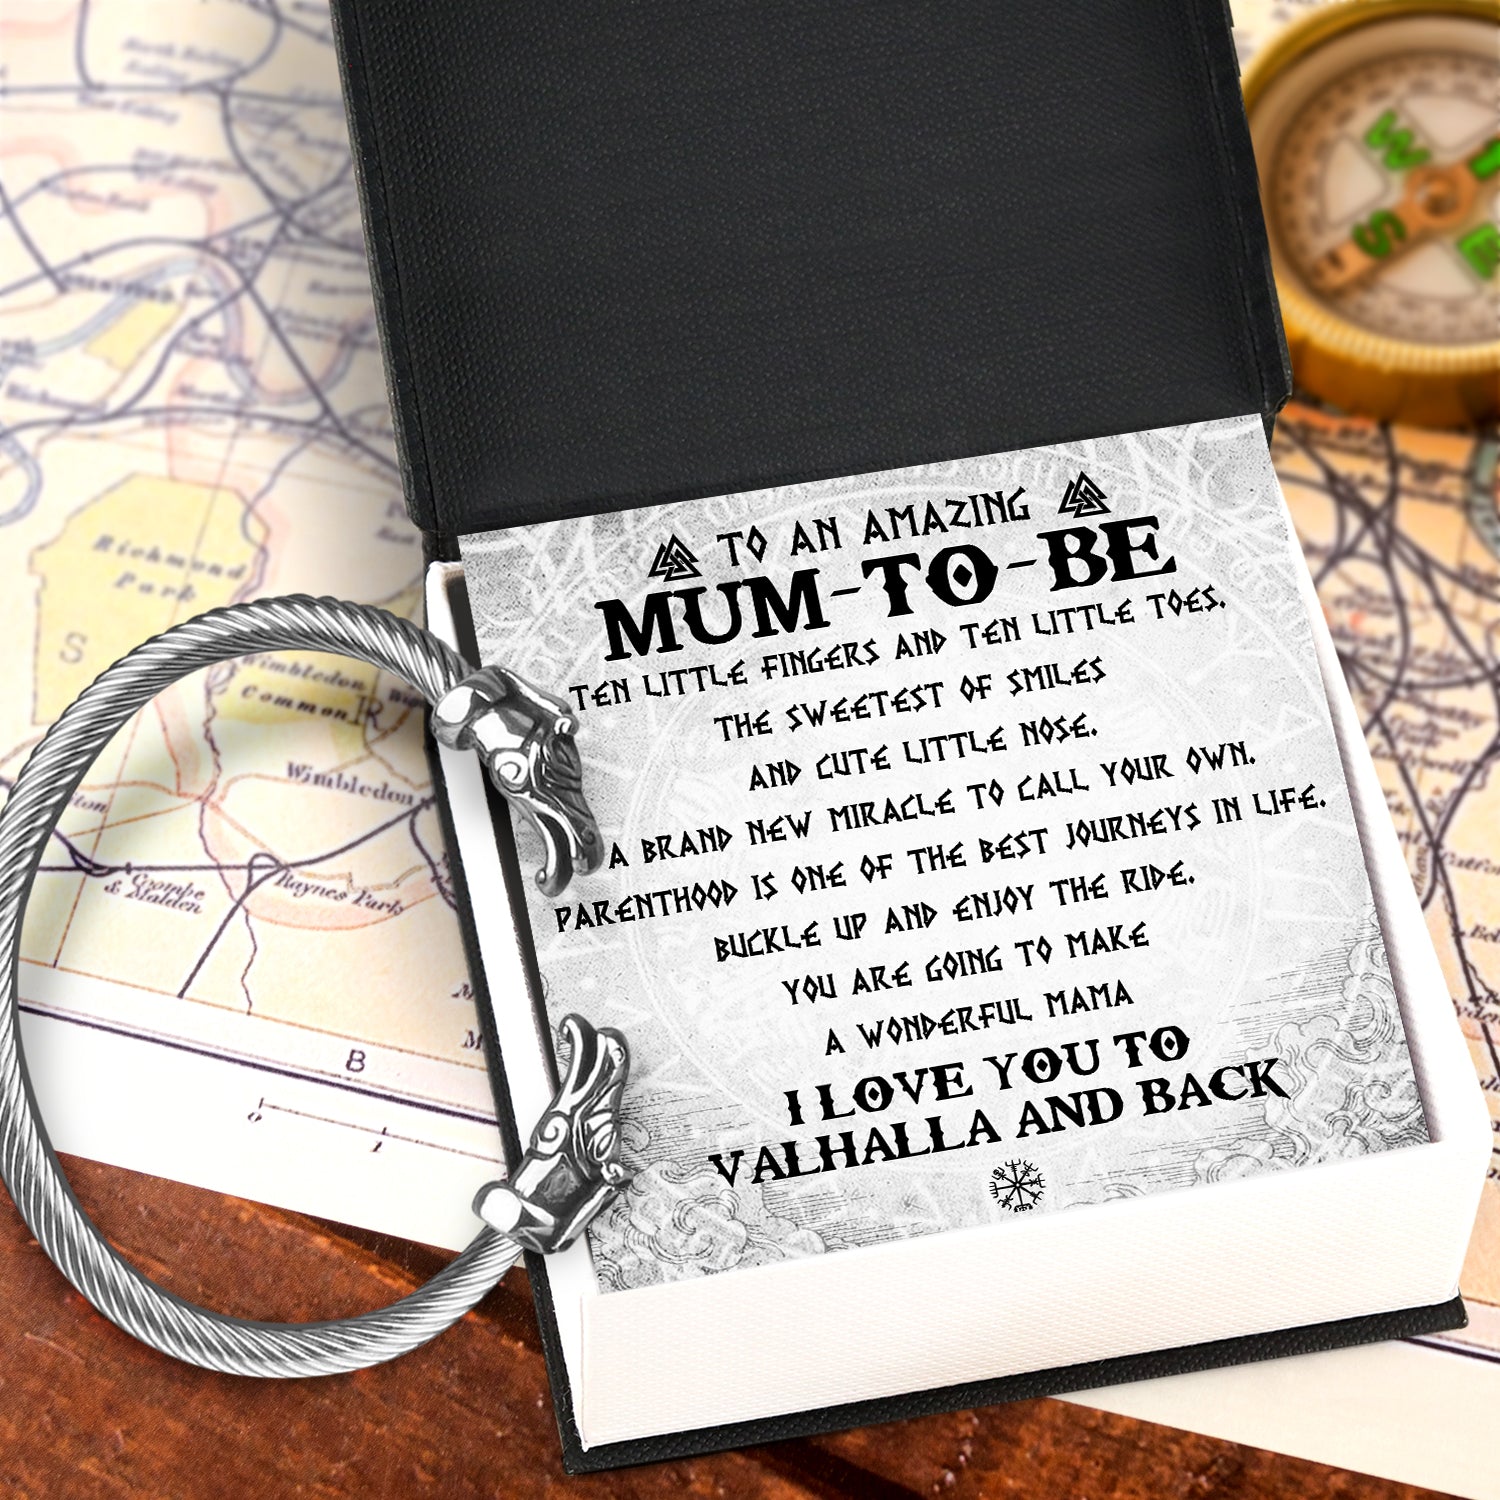 Norse Dragon Bracelet - Viking - To My Mum-to-be - I Love You To Valhalla And Back - Ukgbzi19003